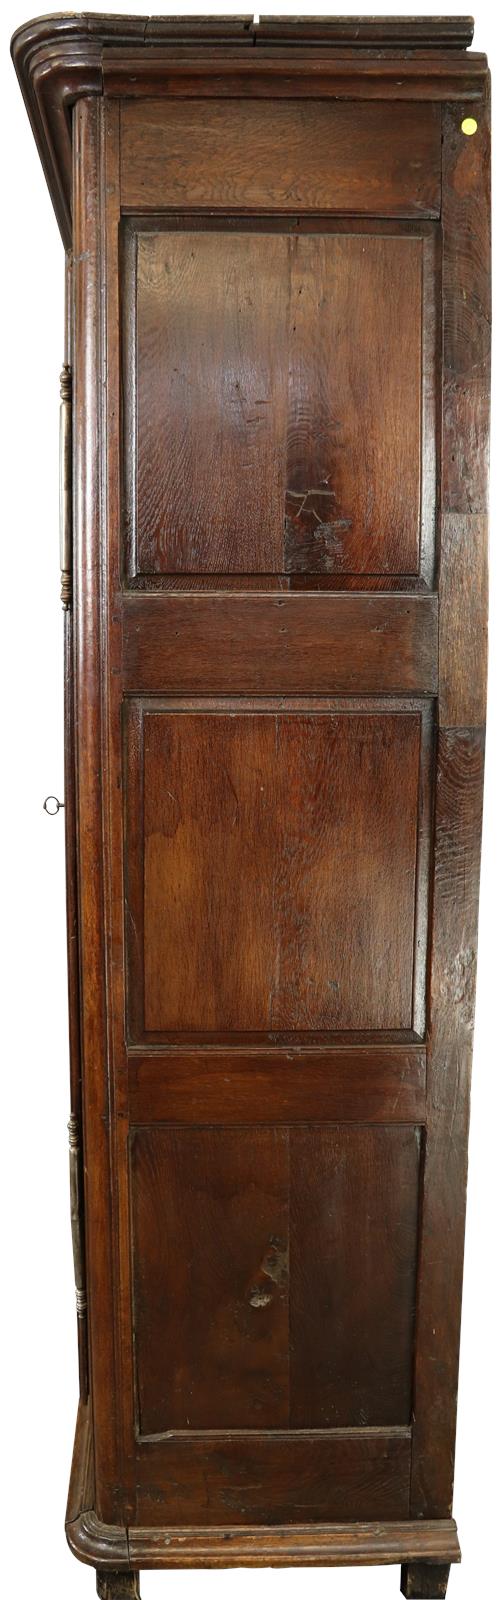 Armoire Antique French Provincial Very Old 1790 Oak Wood Peg Construction Heart -Image 14